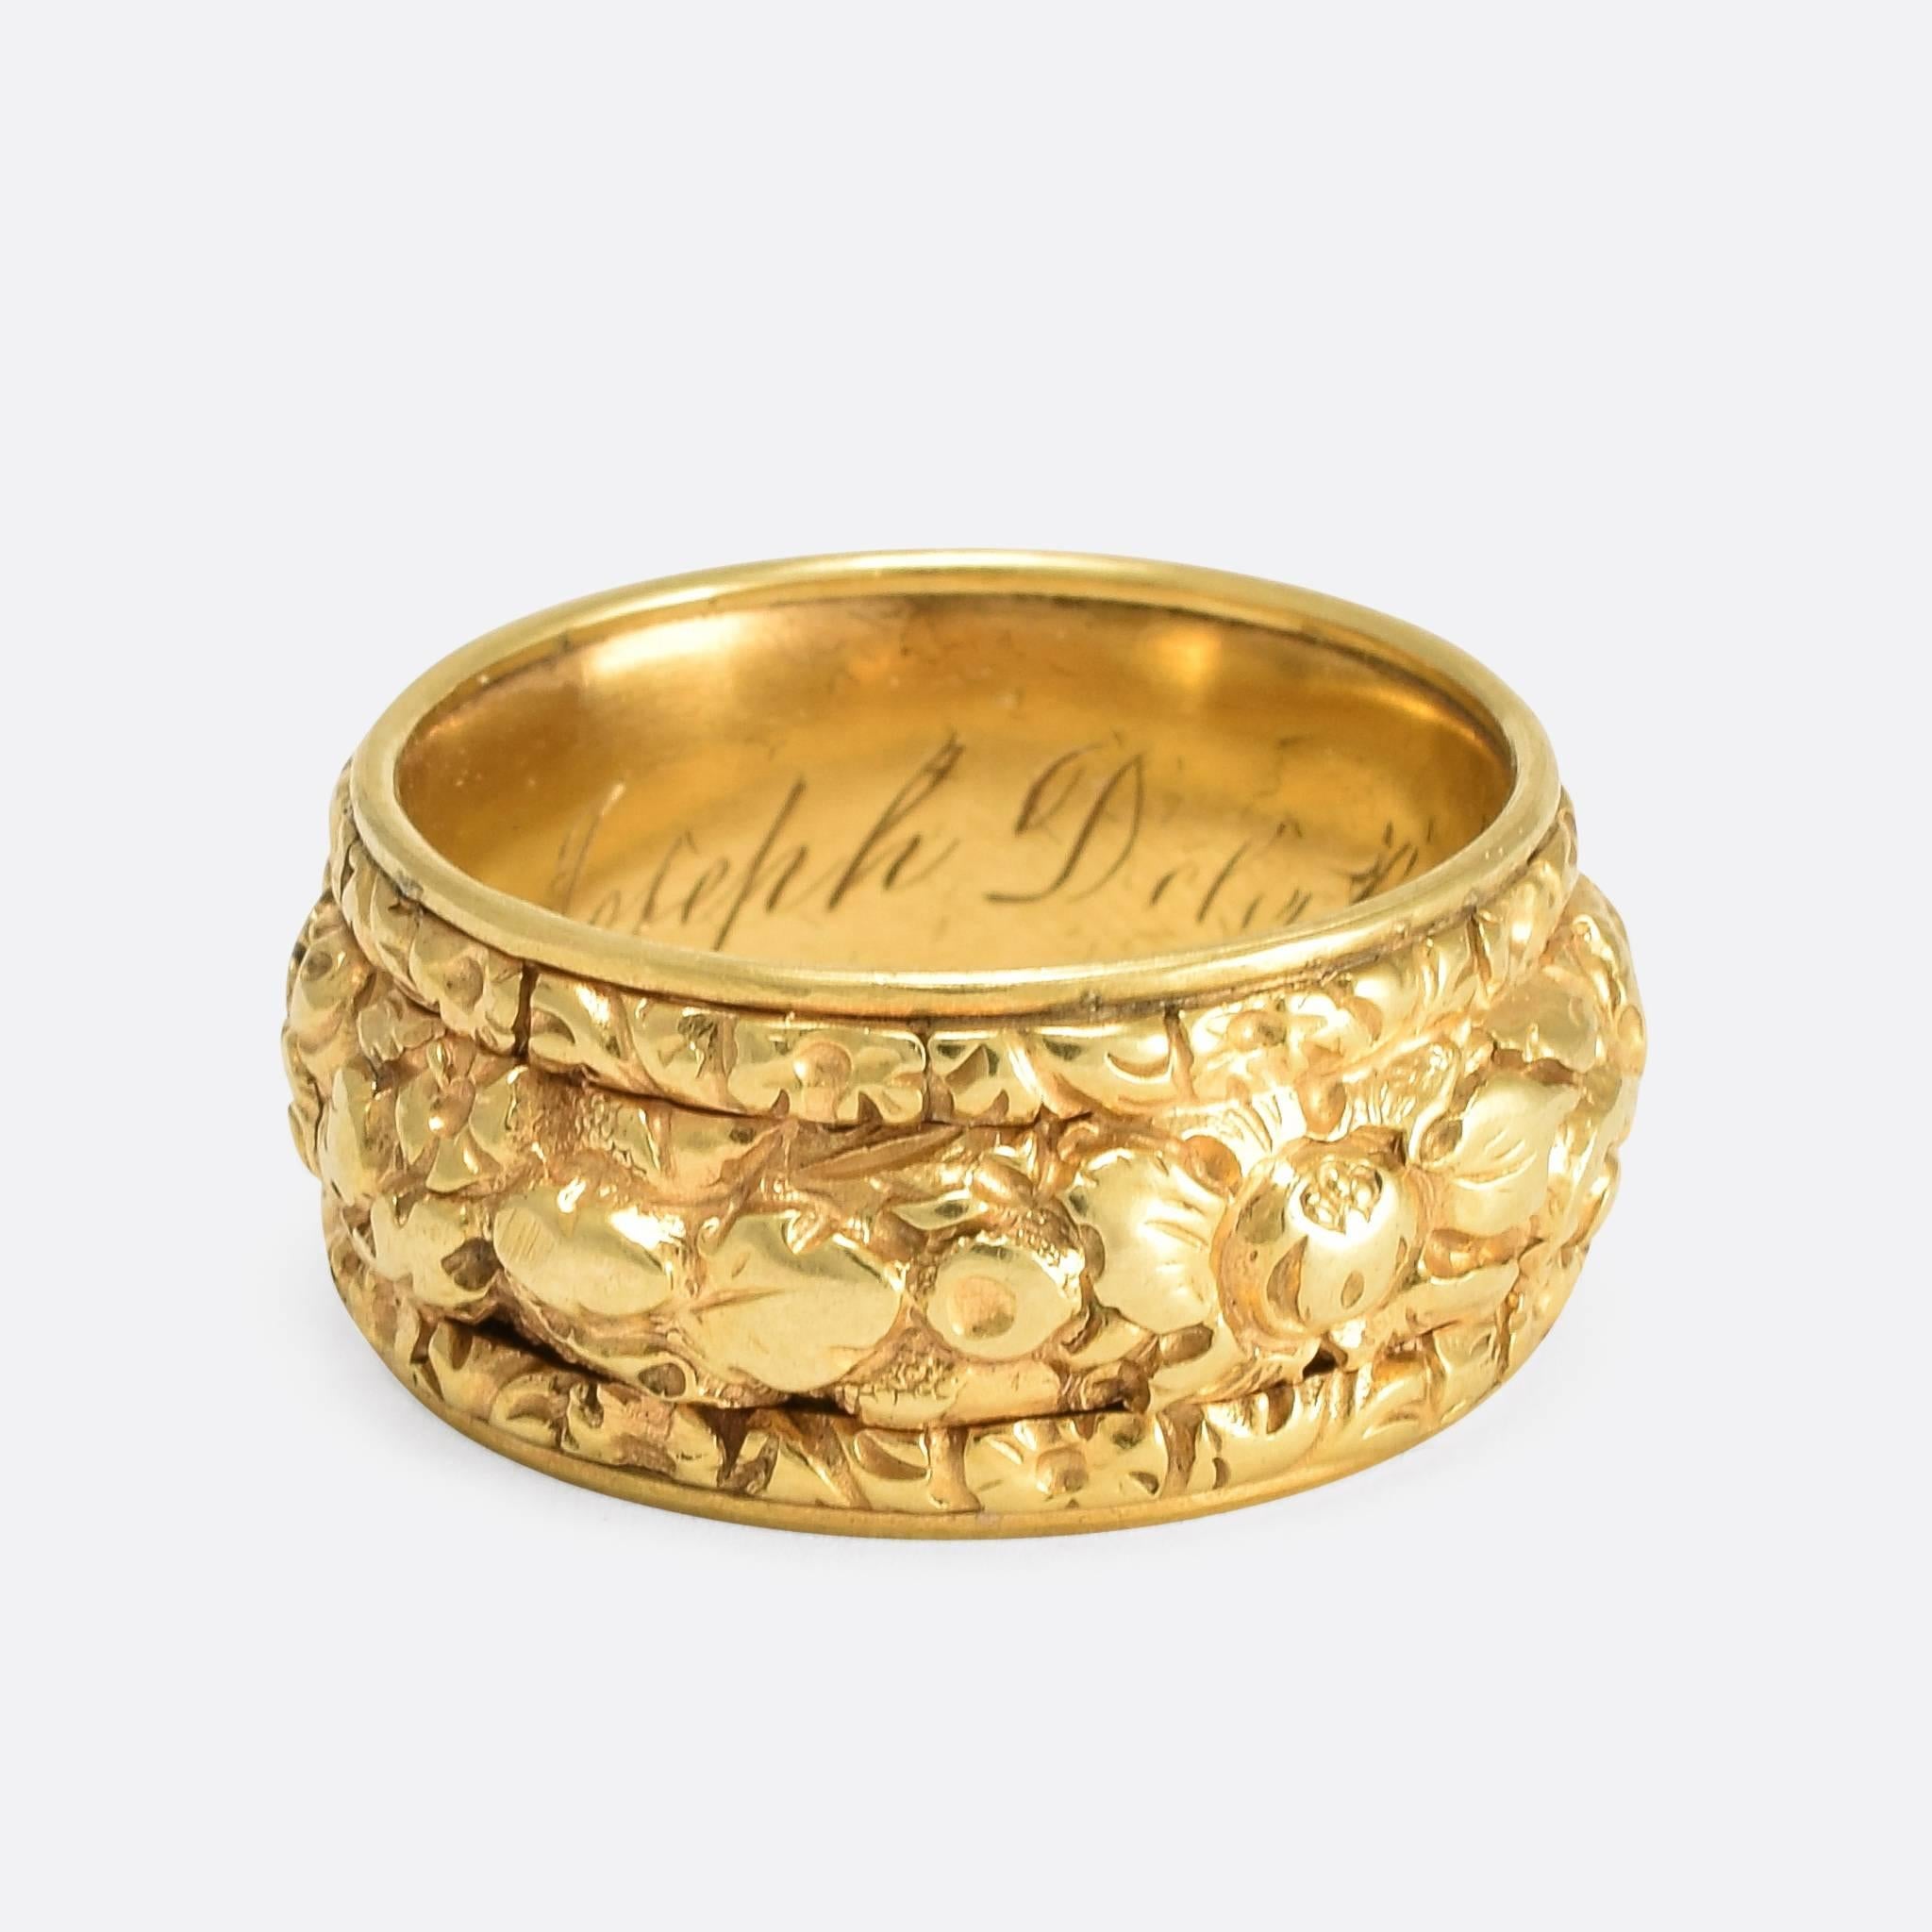 This glorious 19th Century memorial ring features deeply chased detail to the outer band, with flowers, foliage, and shell motifs. An inscription inside reads: 